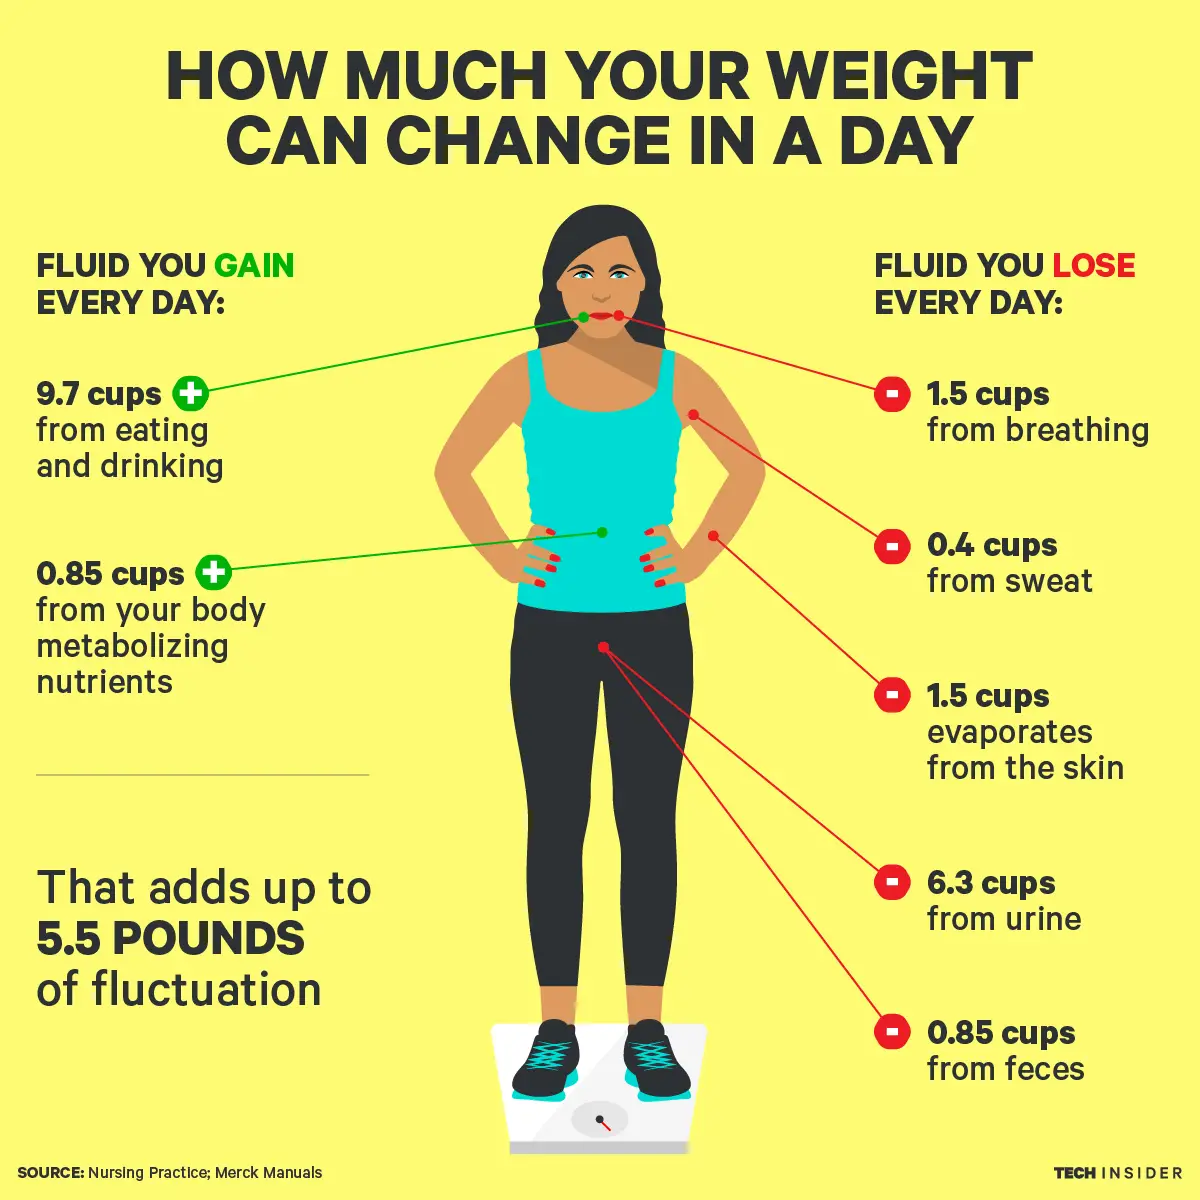 Did You Know You Lose Weight Every Day? Here Is The Good News!